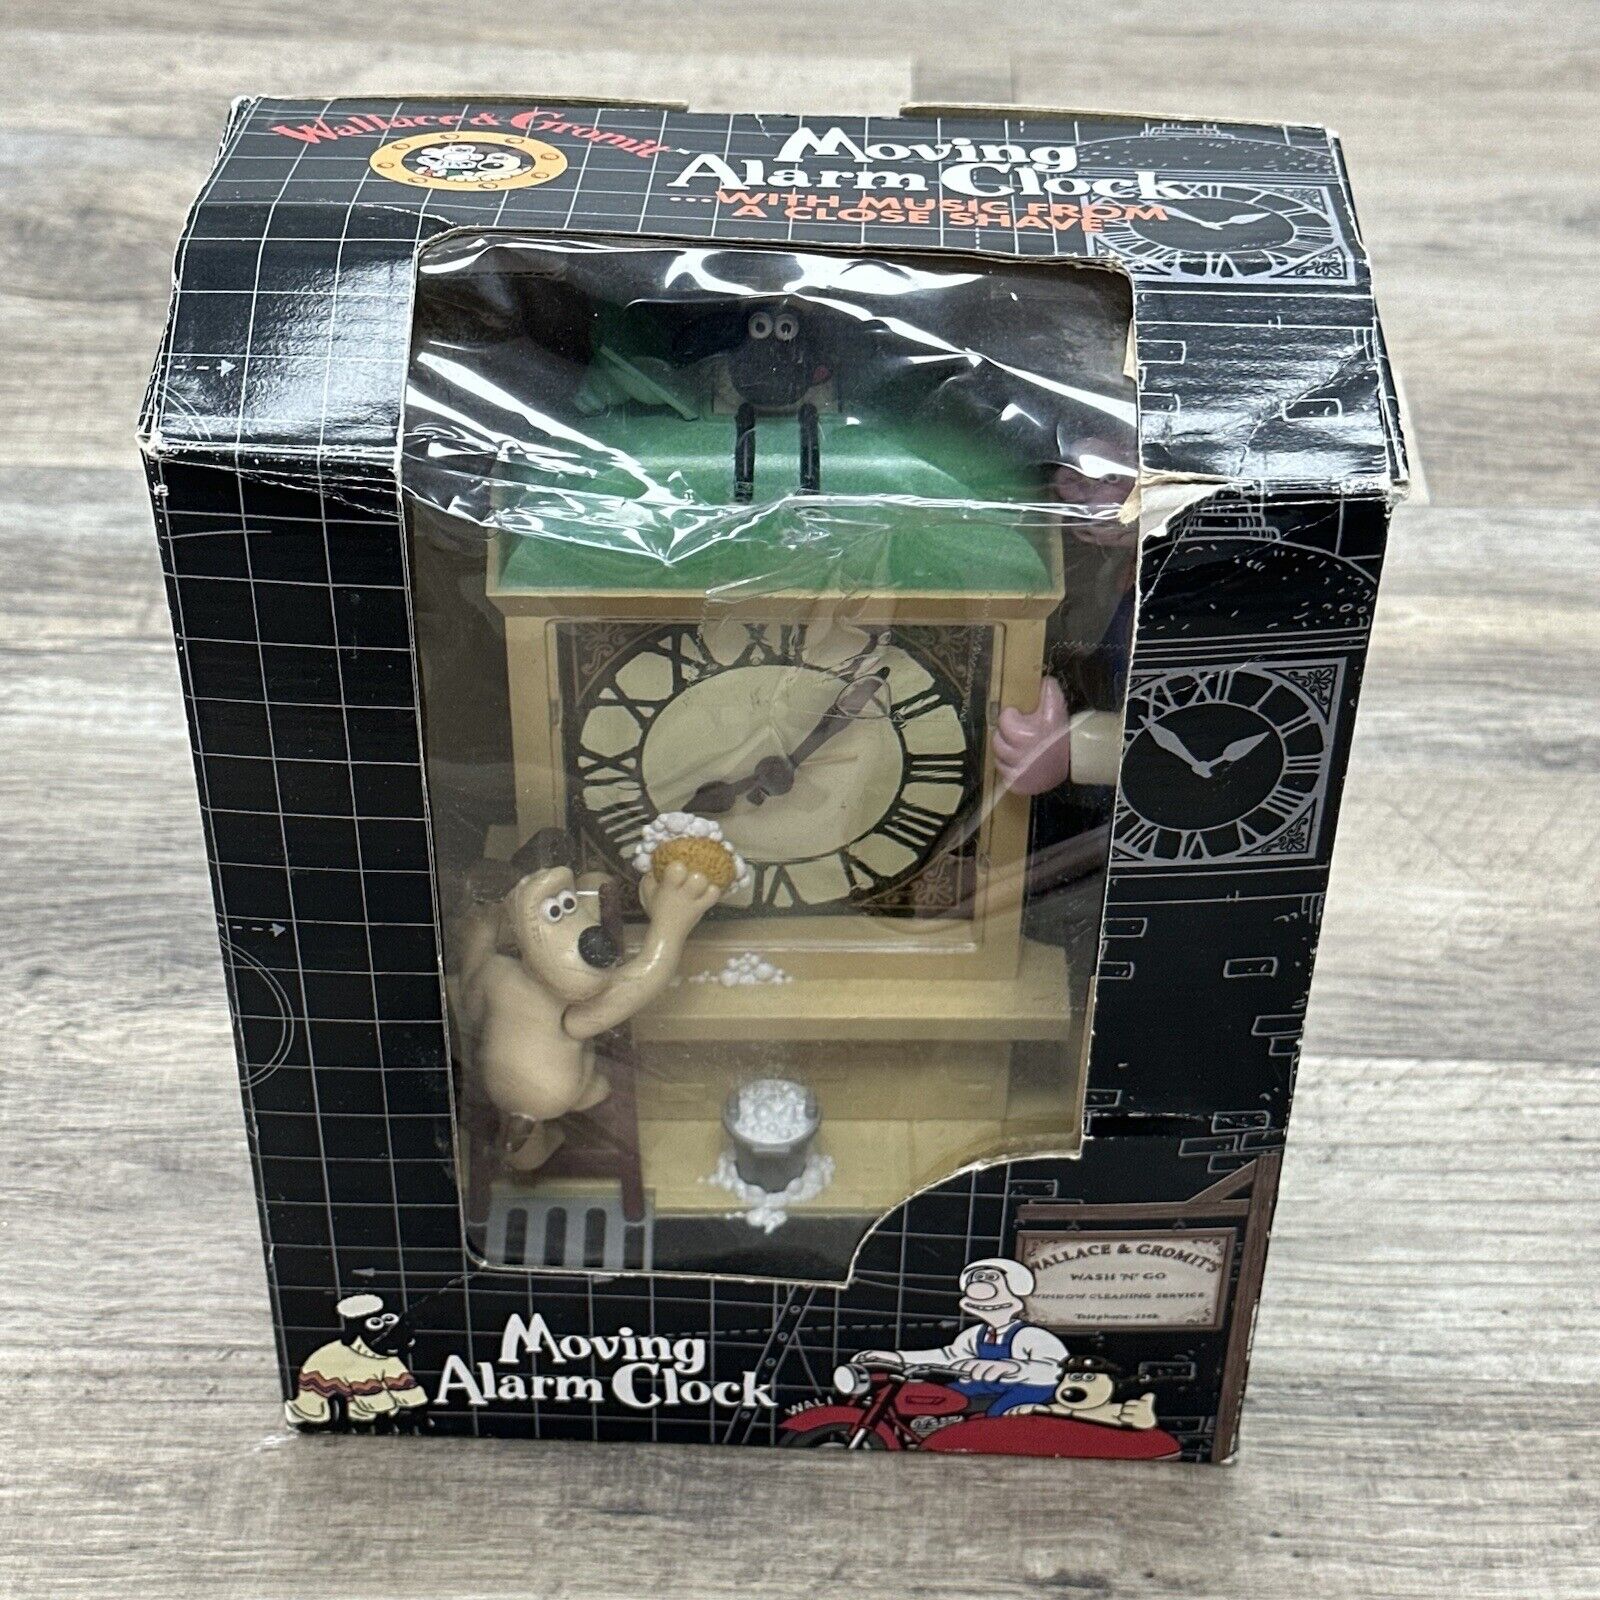 Wallace & Gromit Musical Alarm Vintage Clock - Somewhat Works - READ